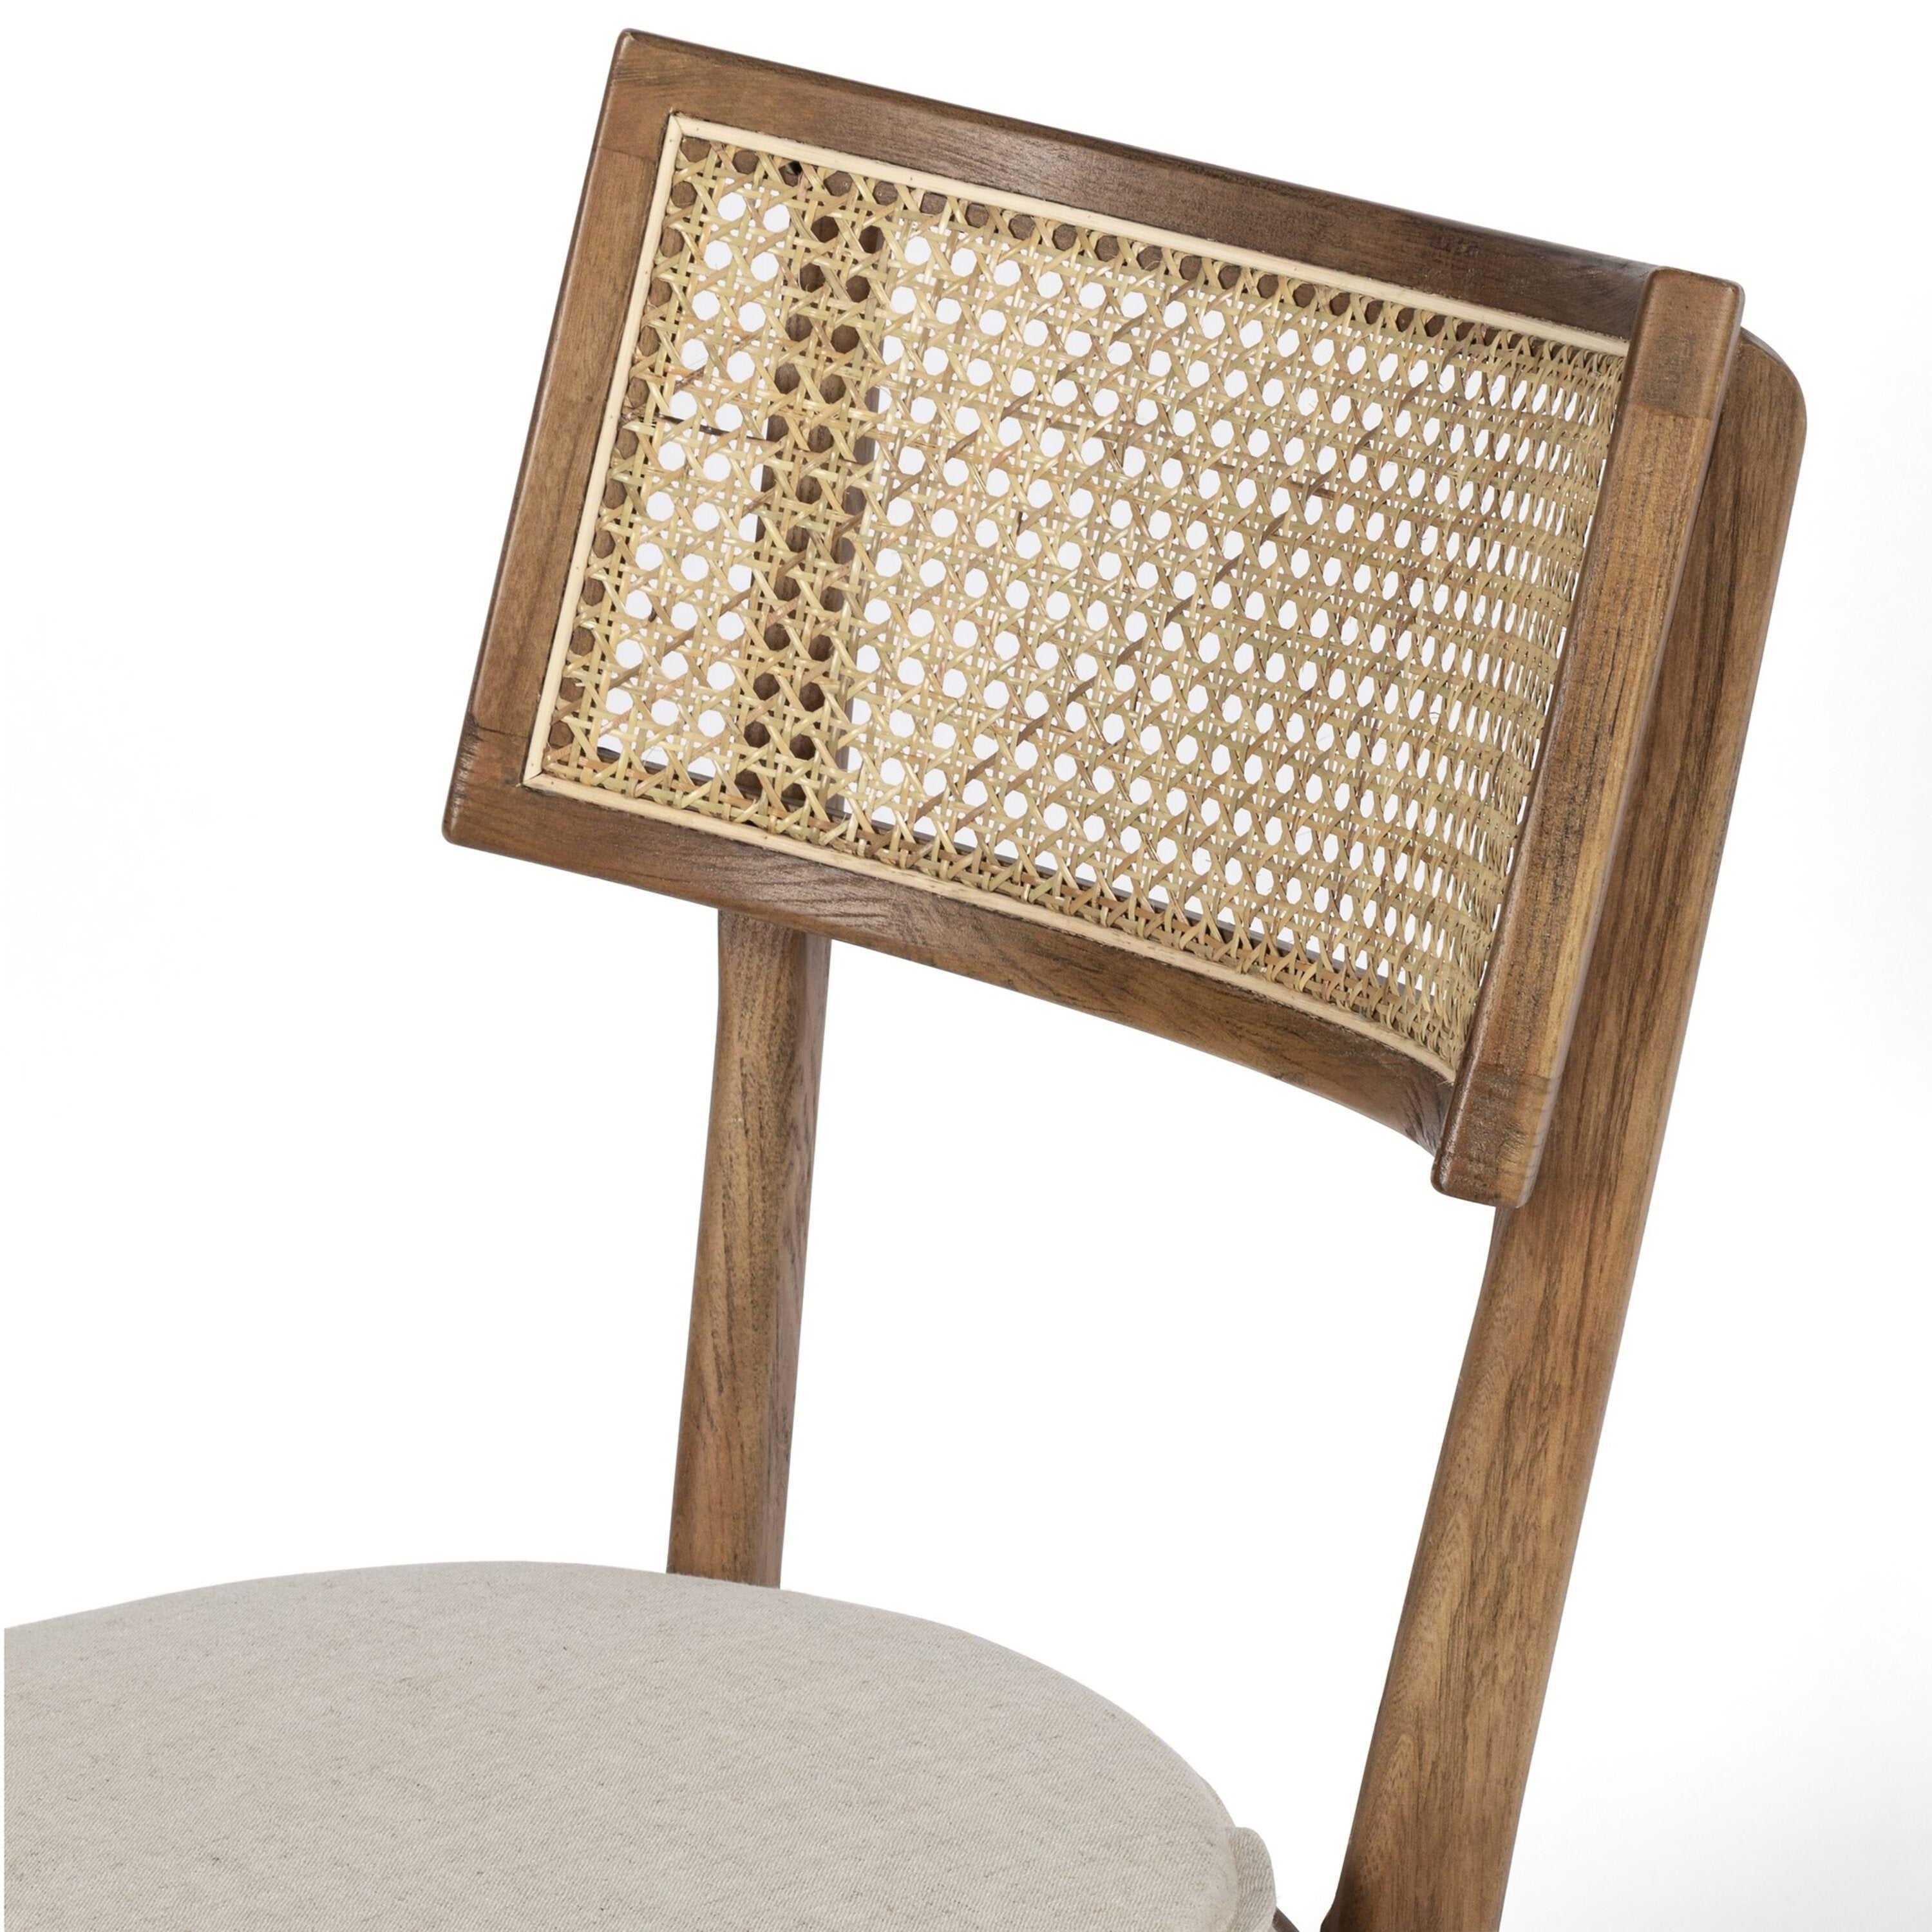 Libby Cane Dining Chair